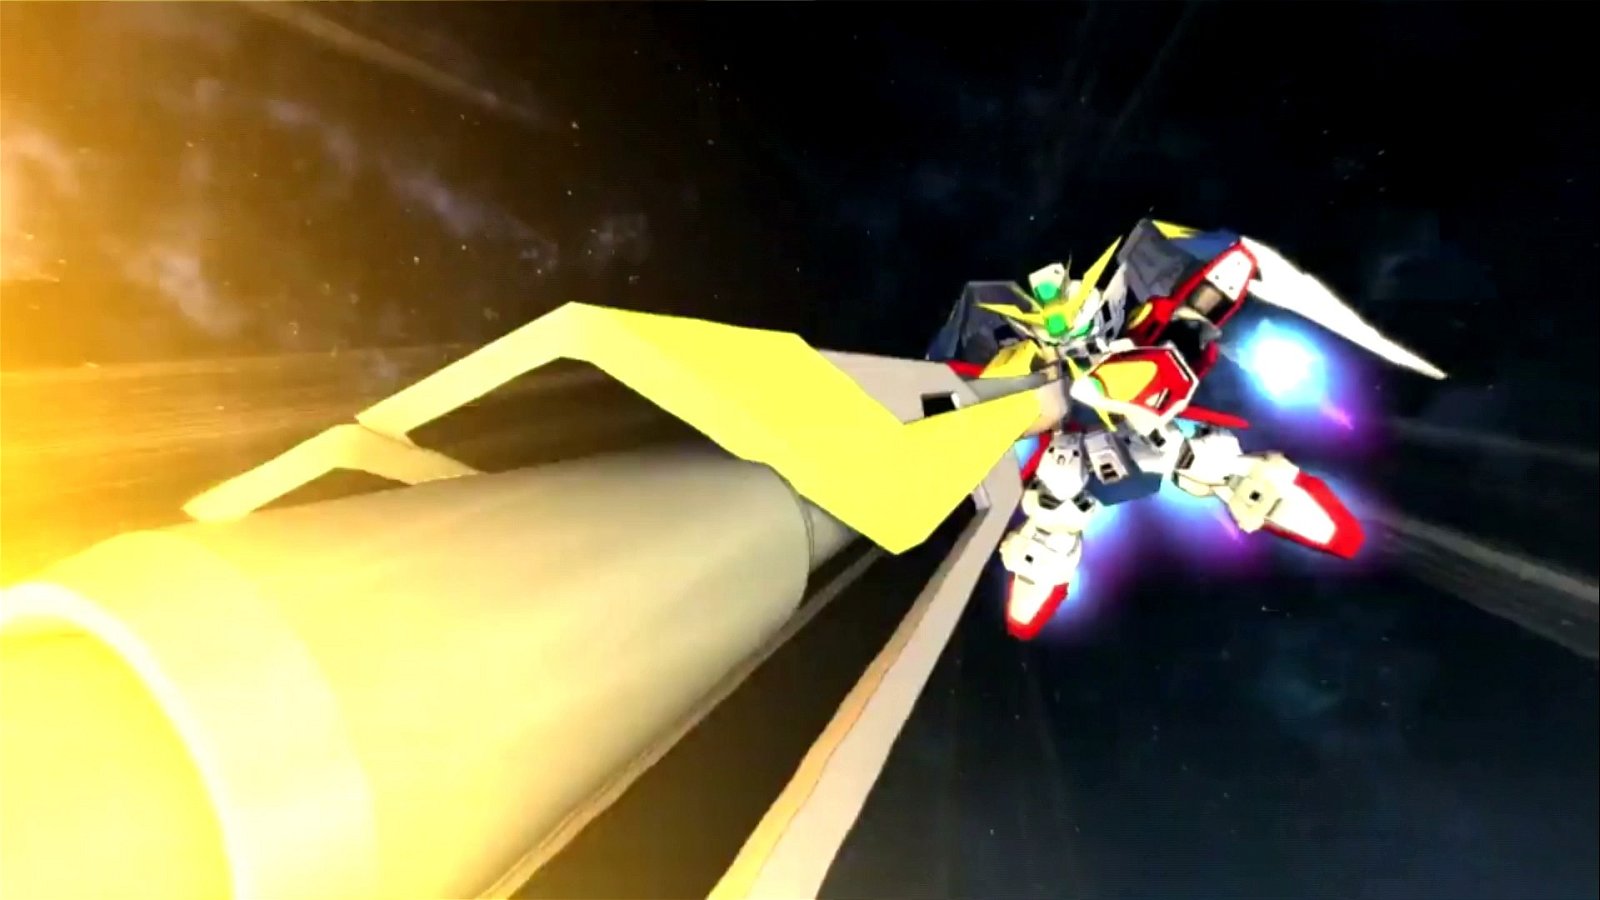 SD Gundam G Generation Cross Rays, SD Gundam G Generation Cross Rays Premium G Sound Edition, Premium G Sound Edition, PlayStation 4, Nintendo Switch, PS4, Switch, Japan, release date, gameplay, features, price, pre-order